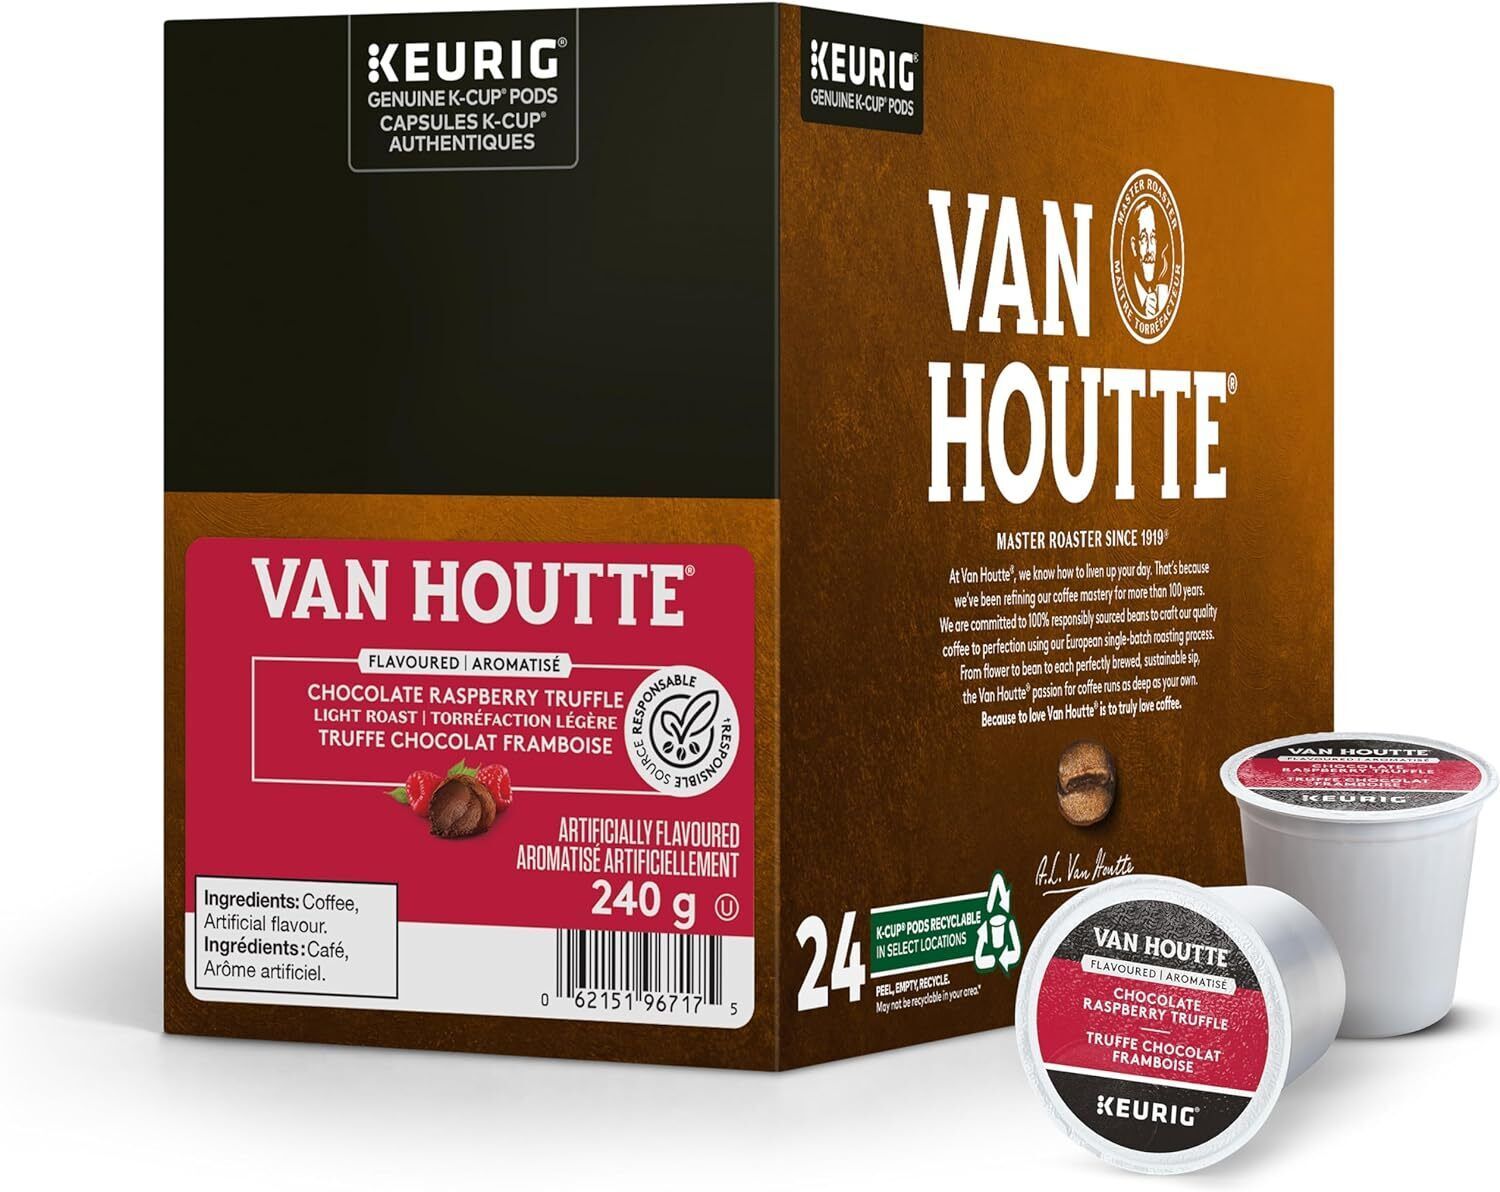 Van Houtte Chocolate Raspberry Truffle Coffee 24 to 144 K cups Pick Any Size - $23.88 - $109.88